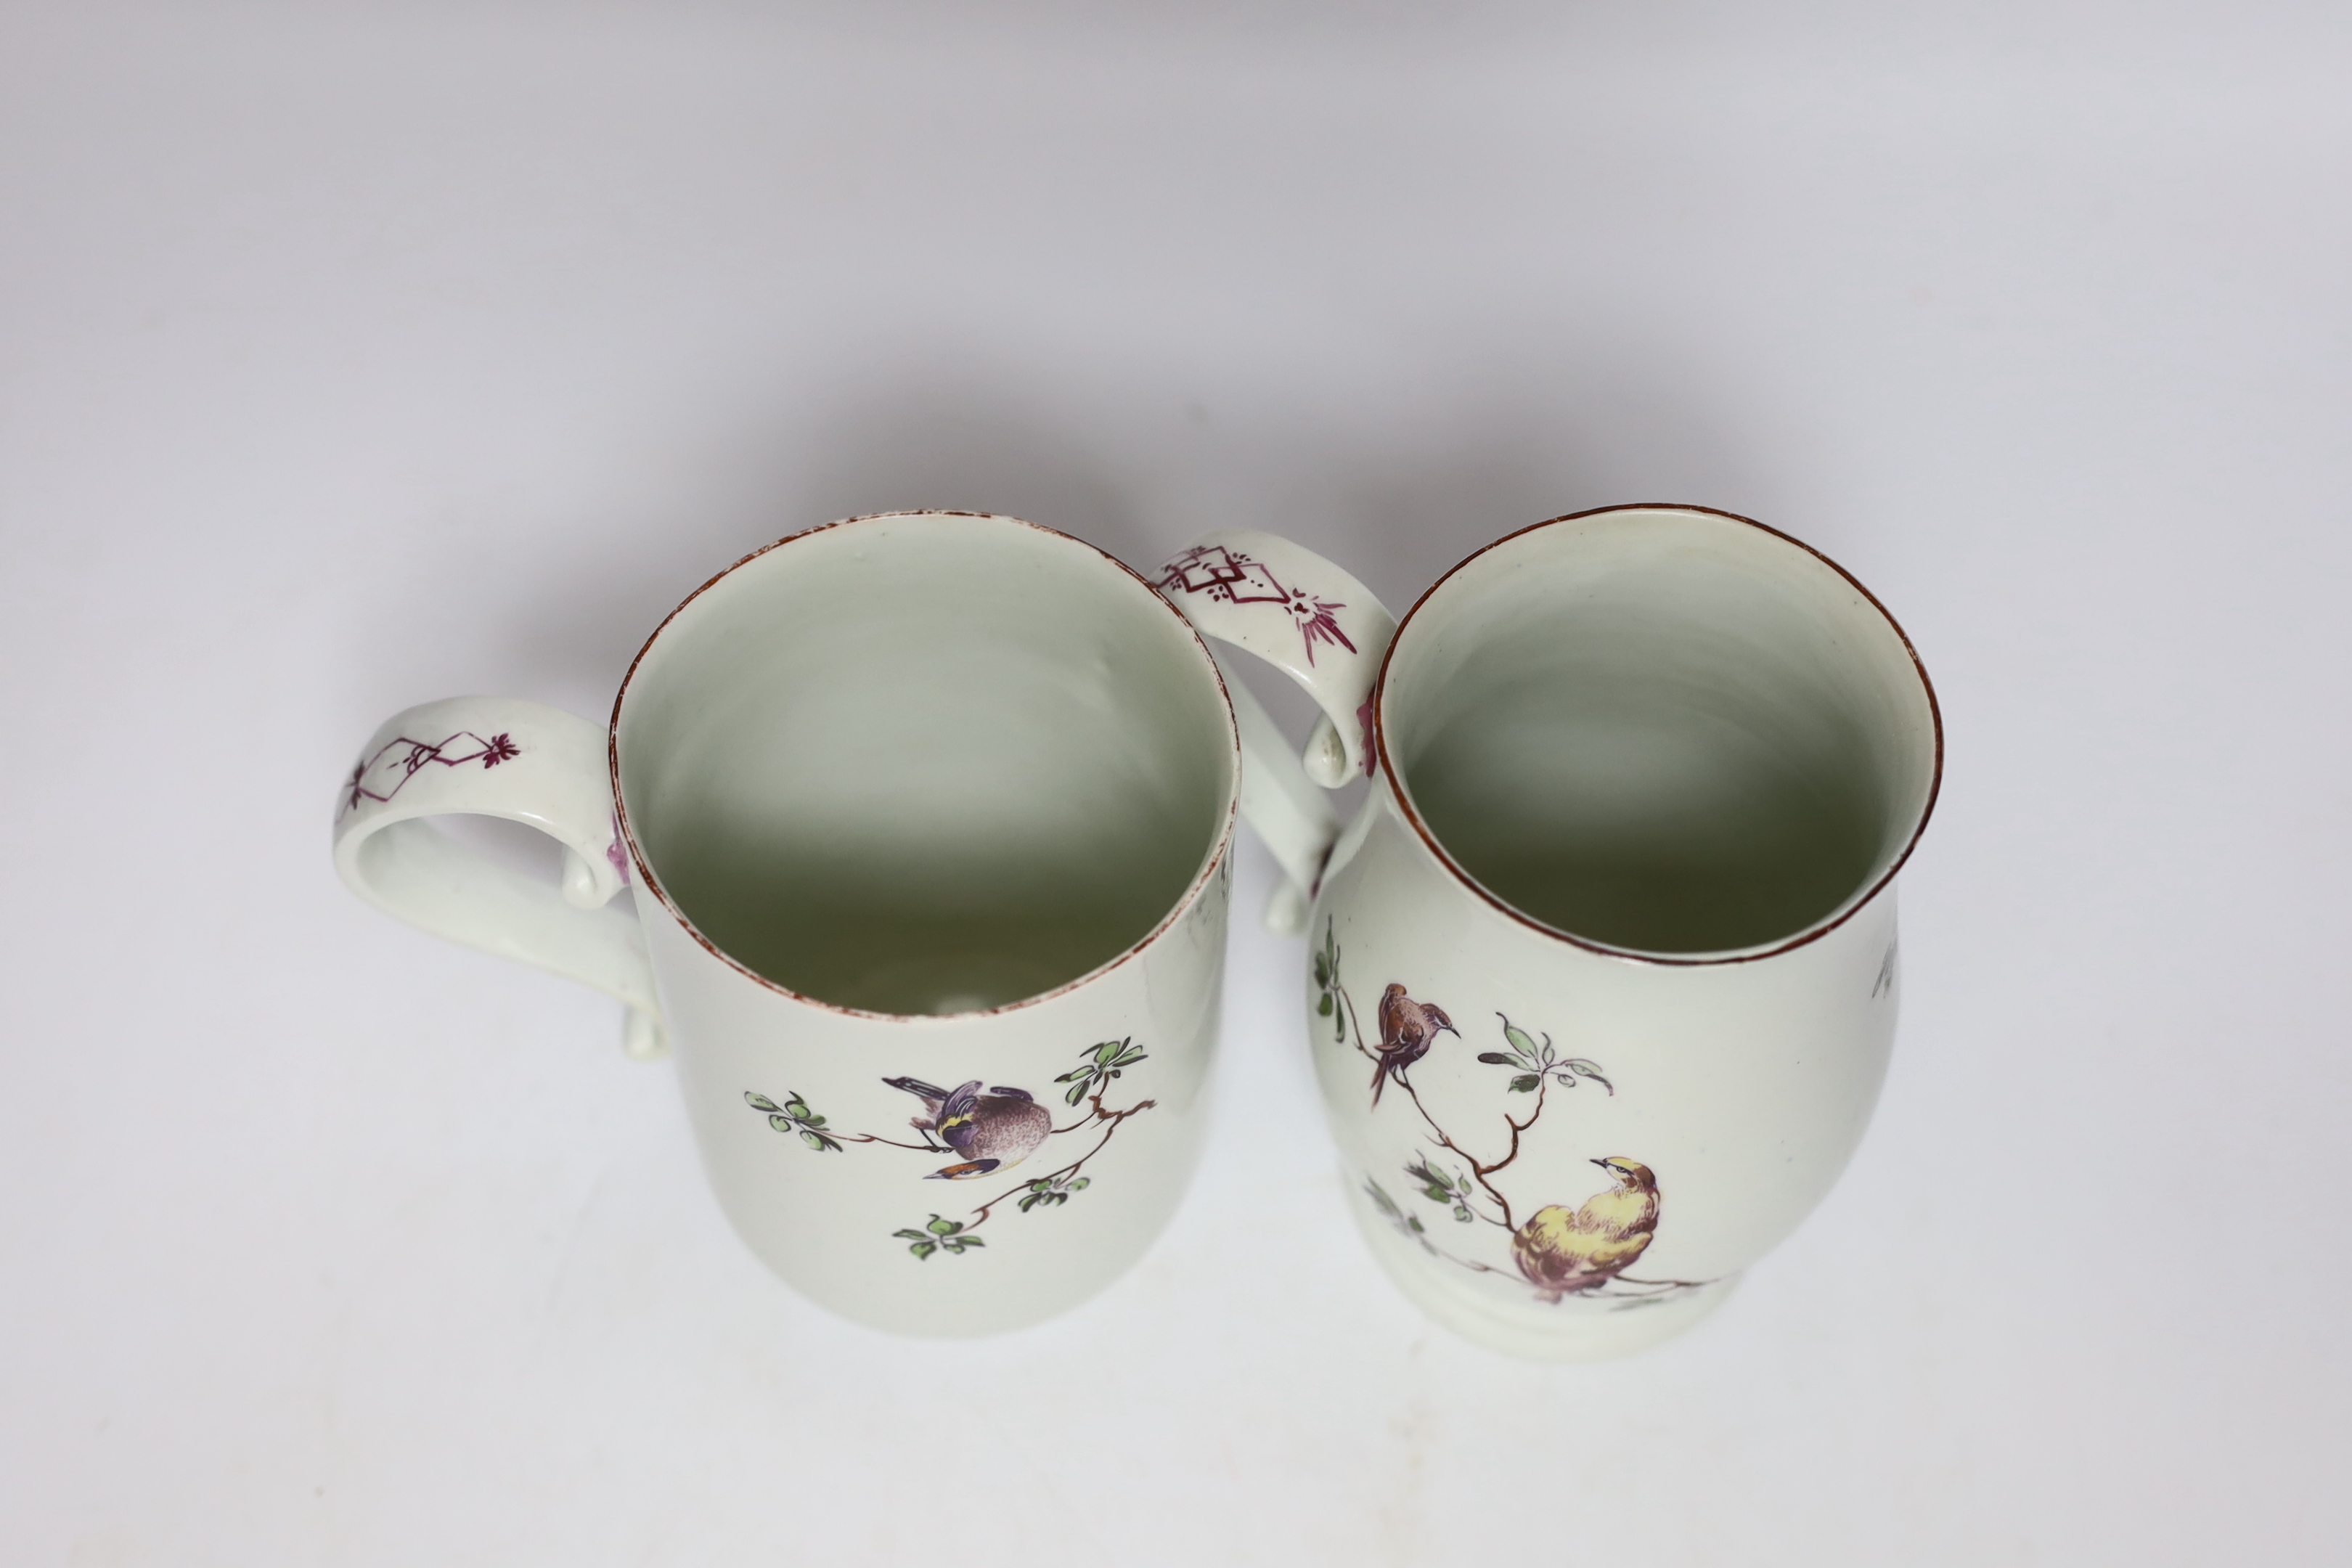 Two Derby mugs, c.1760-65, decorated with birds, tallest 14cm